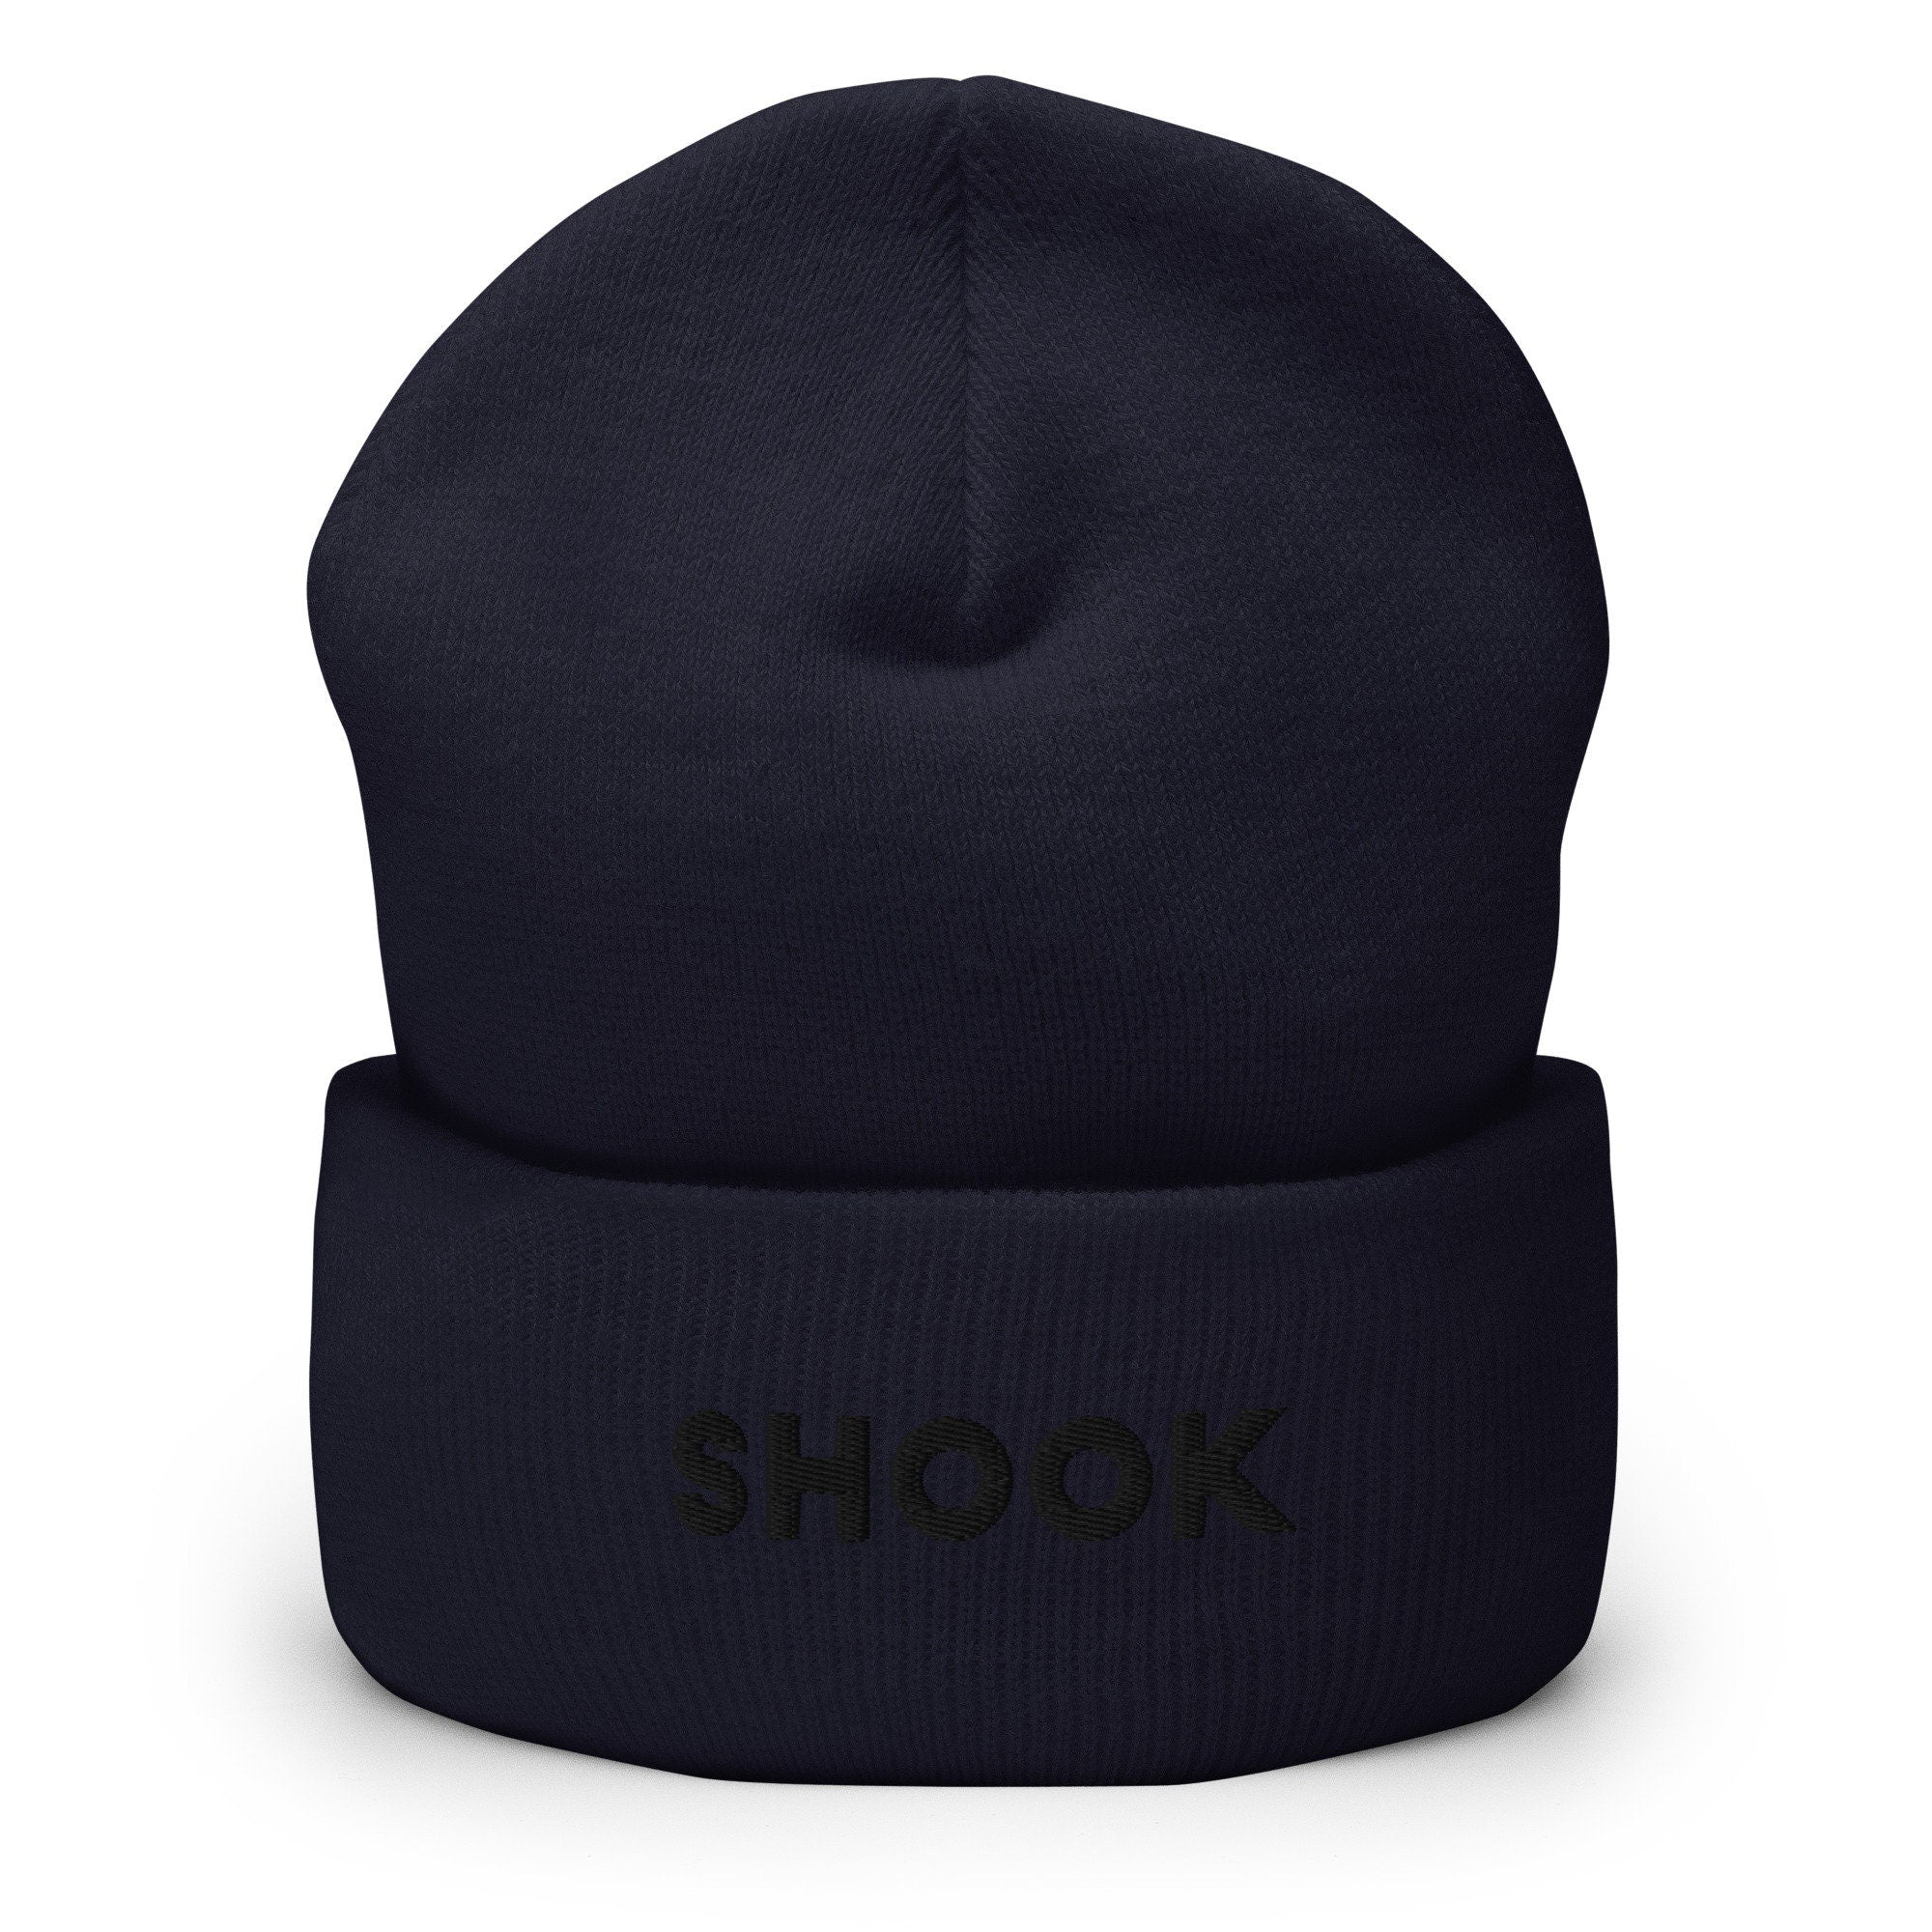 Shook Embroidered Beanie, Handmade Cuffed Knit Unisex Slouchy Adult Winter Hat Cap Gift